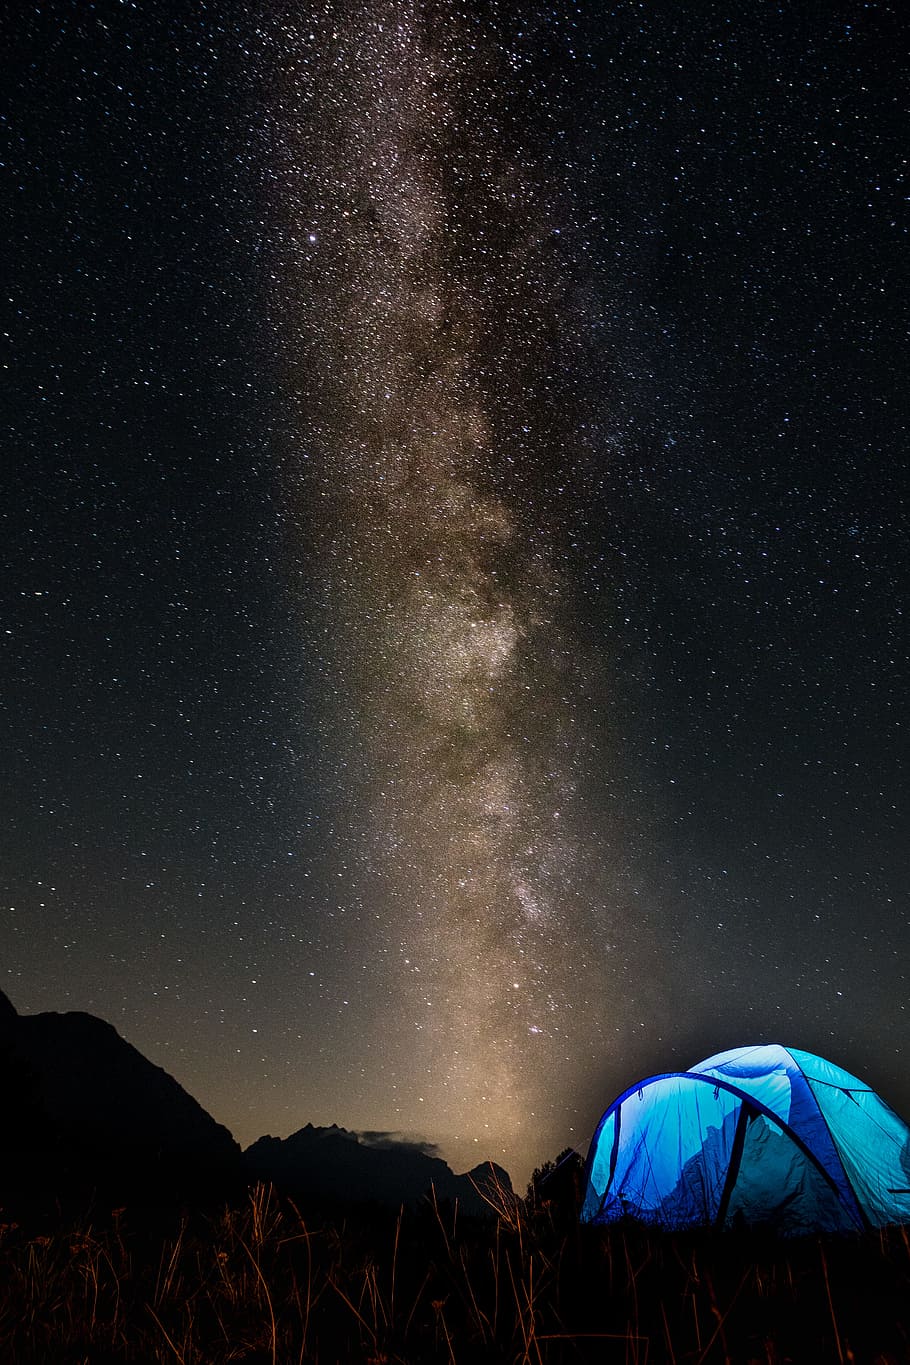 blue dome tent during nighttime, star, starry sky, night photography, HD wallpaper